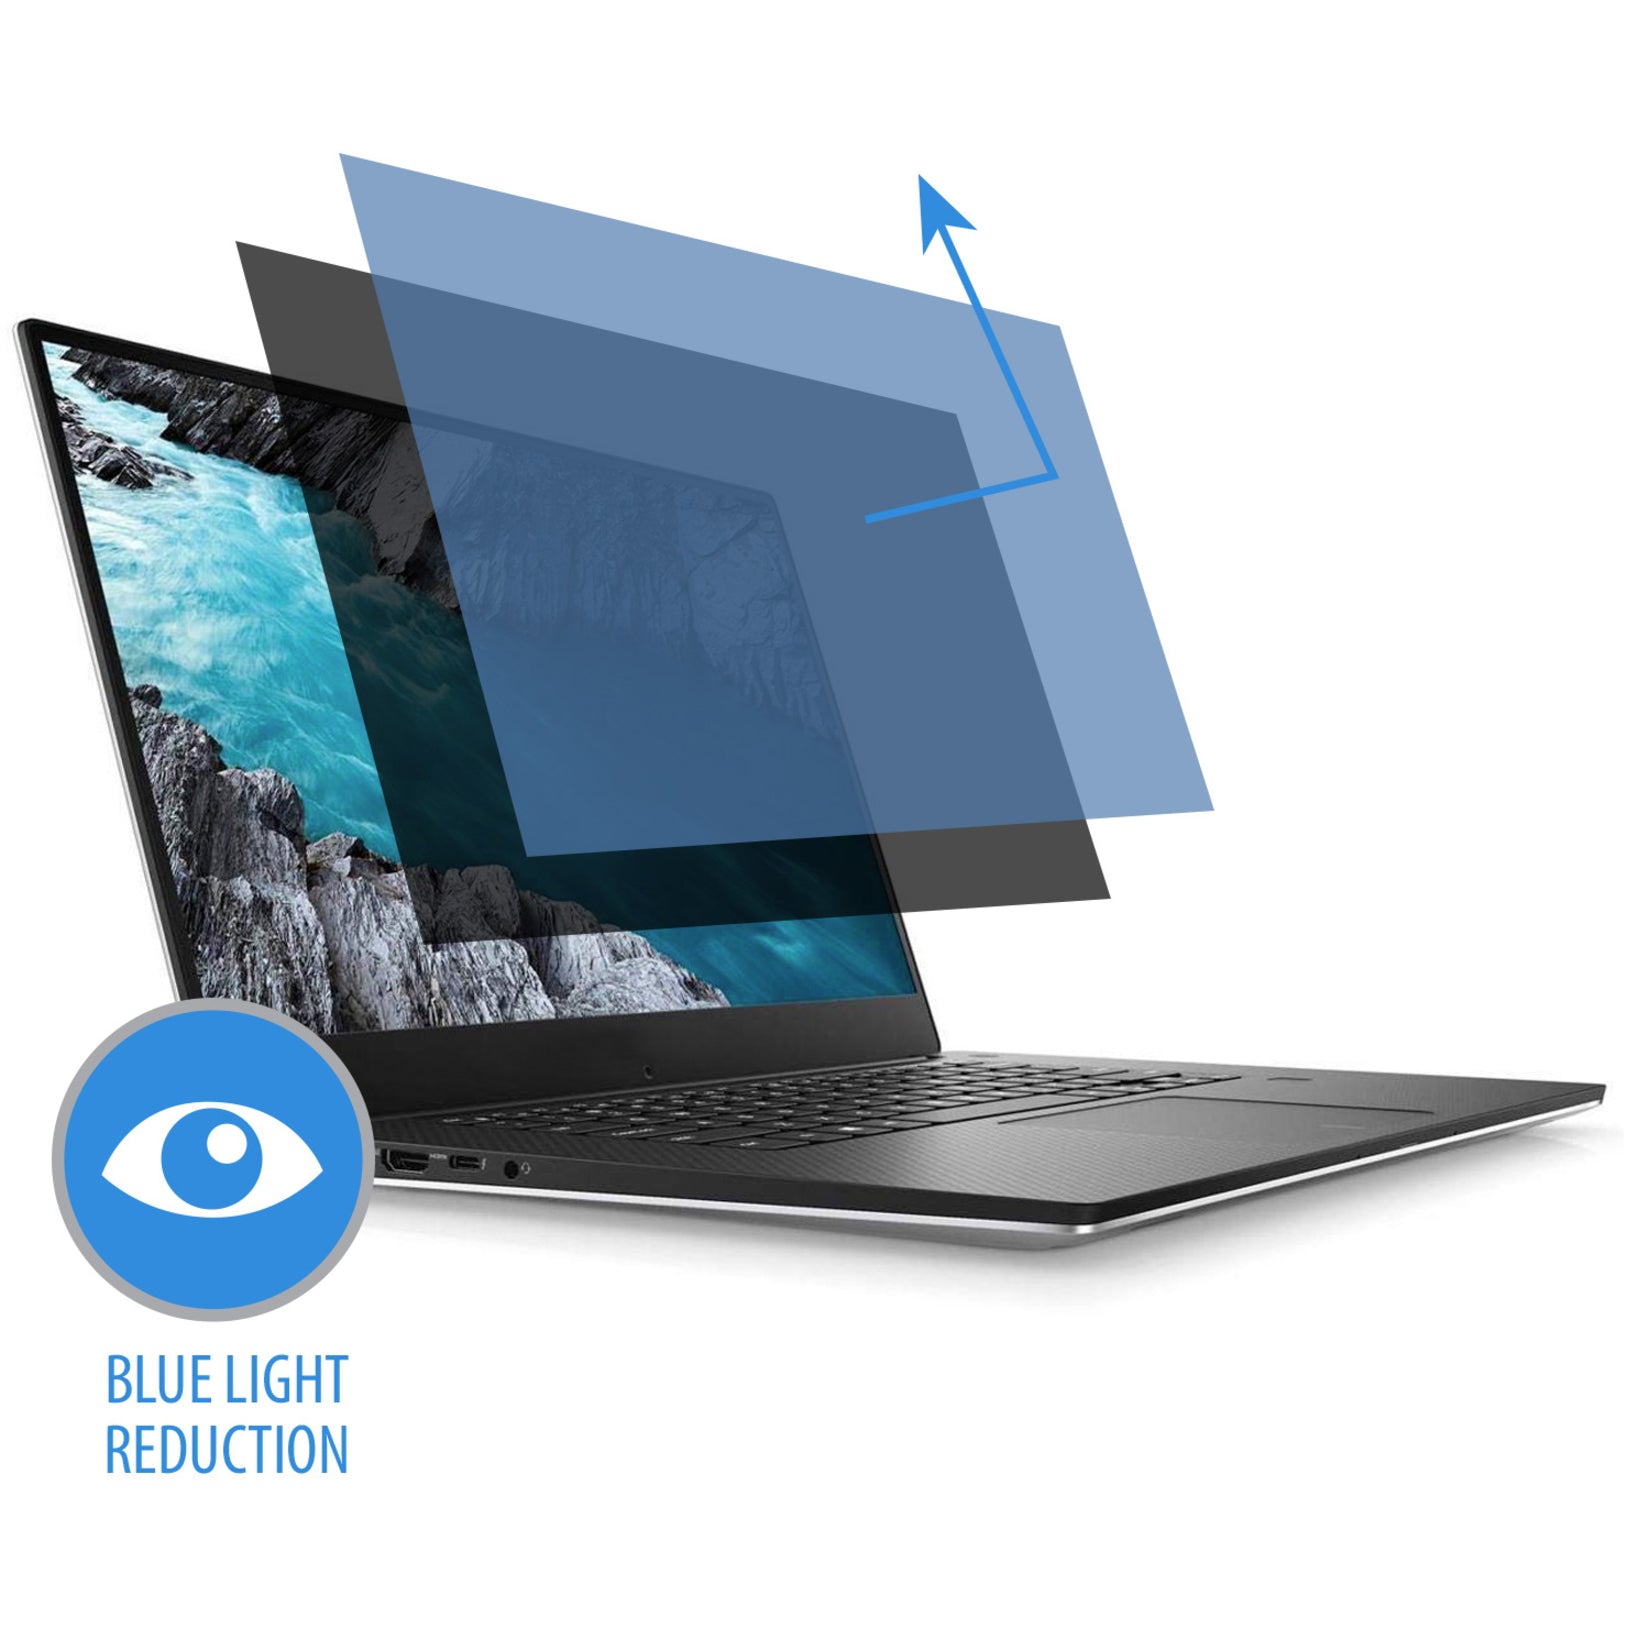 V7 PS156W9 15.6" Privacy Filter for Notebook, 16:9 Aspect Ratio Glossy, Blue Light Reduction, Easy to Apply